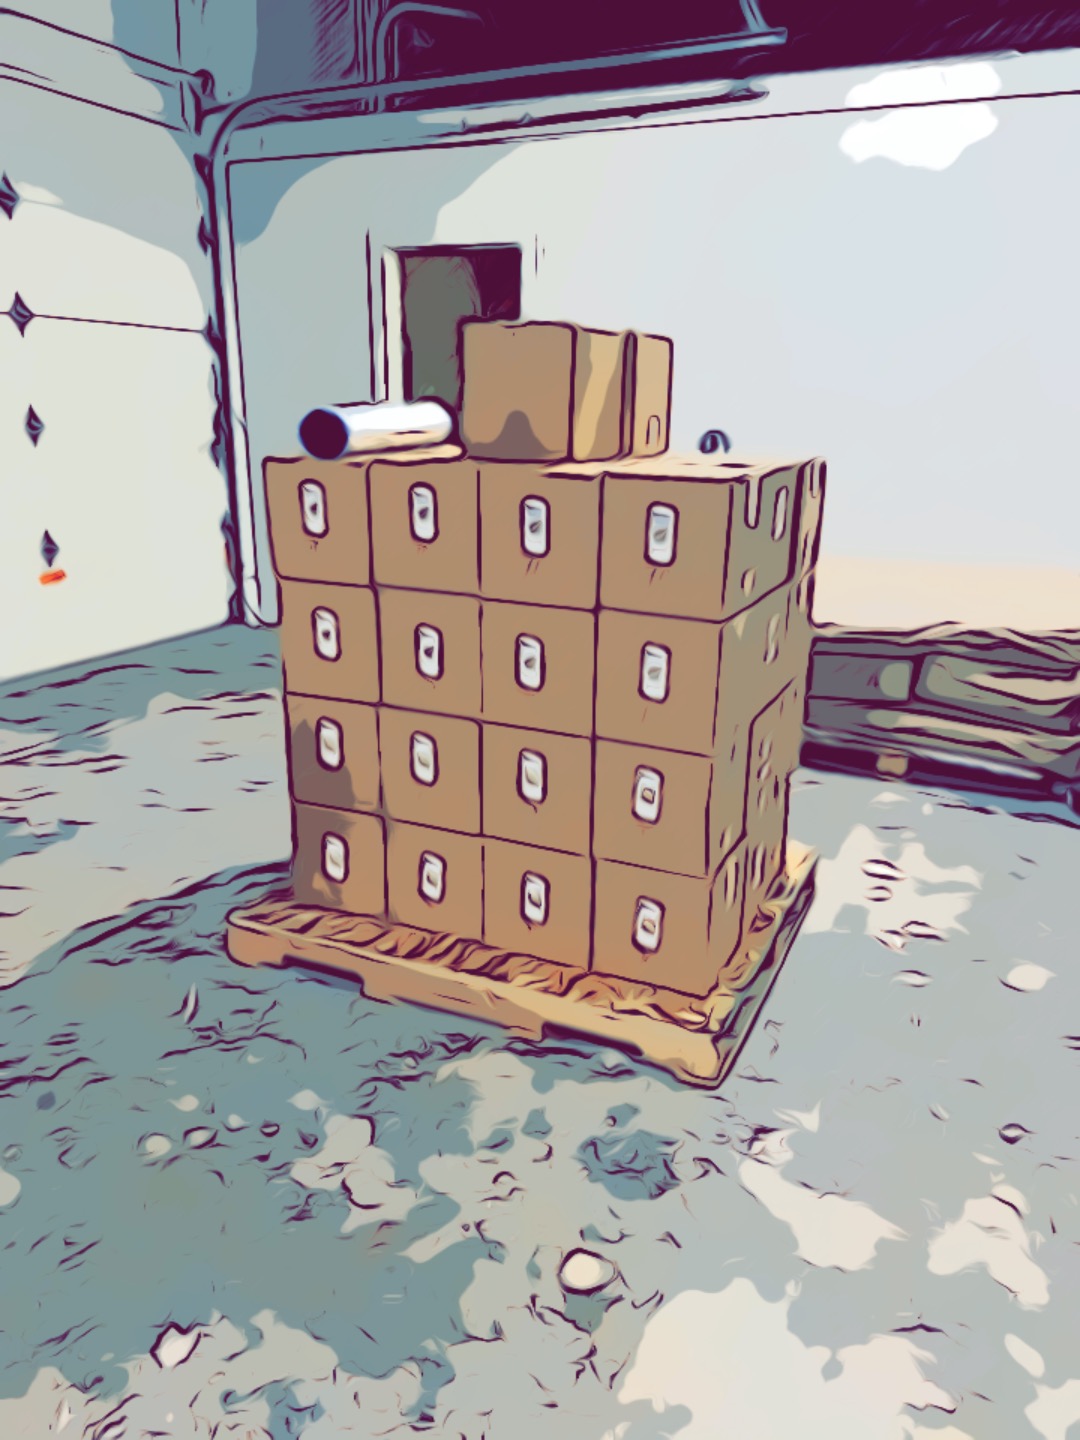 Pallet of Boxes of Coffee